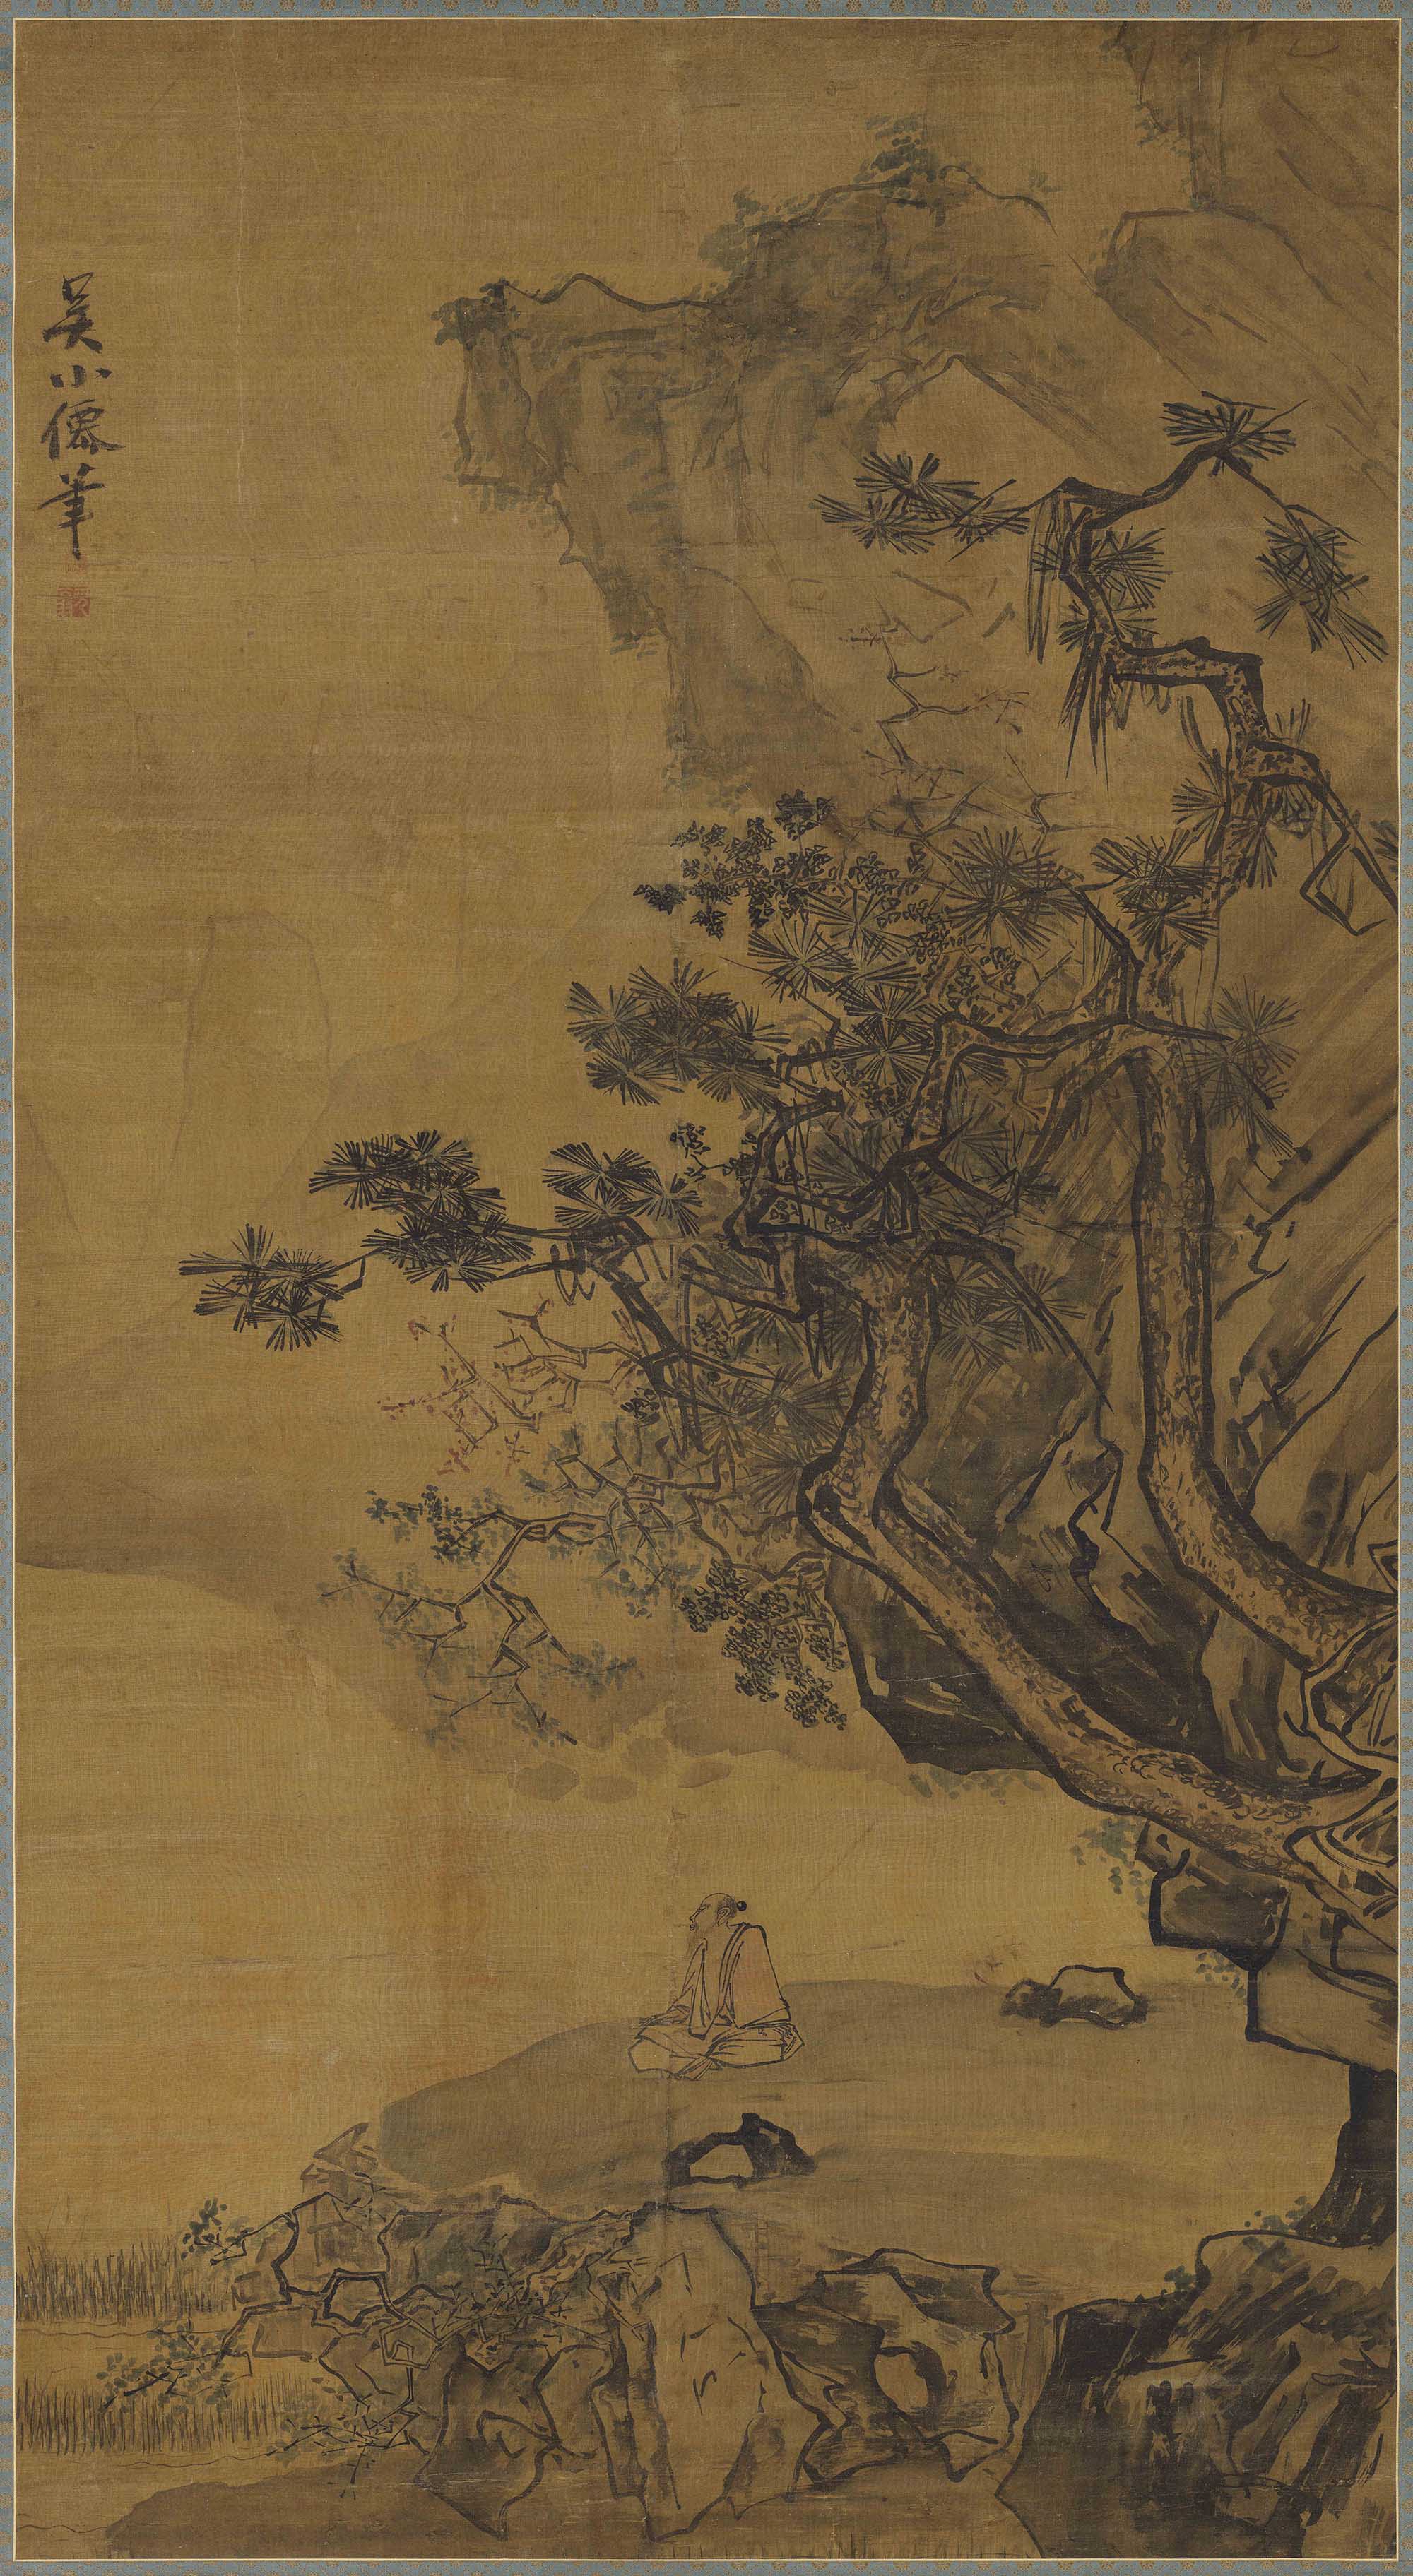 Landscape Attributed to Wu Wei (1459-1508), Ming dynasty